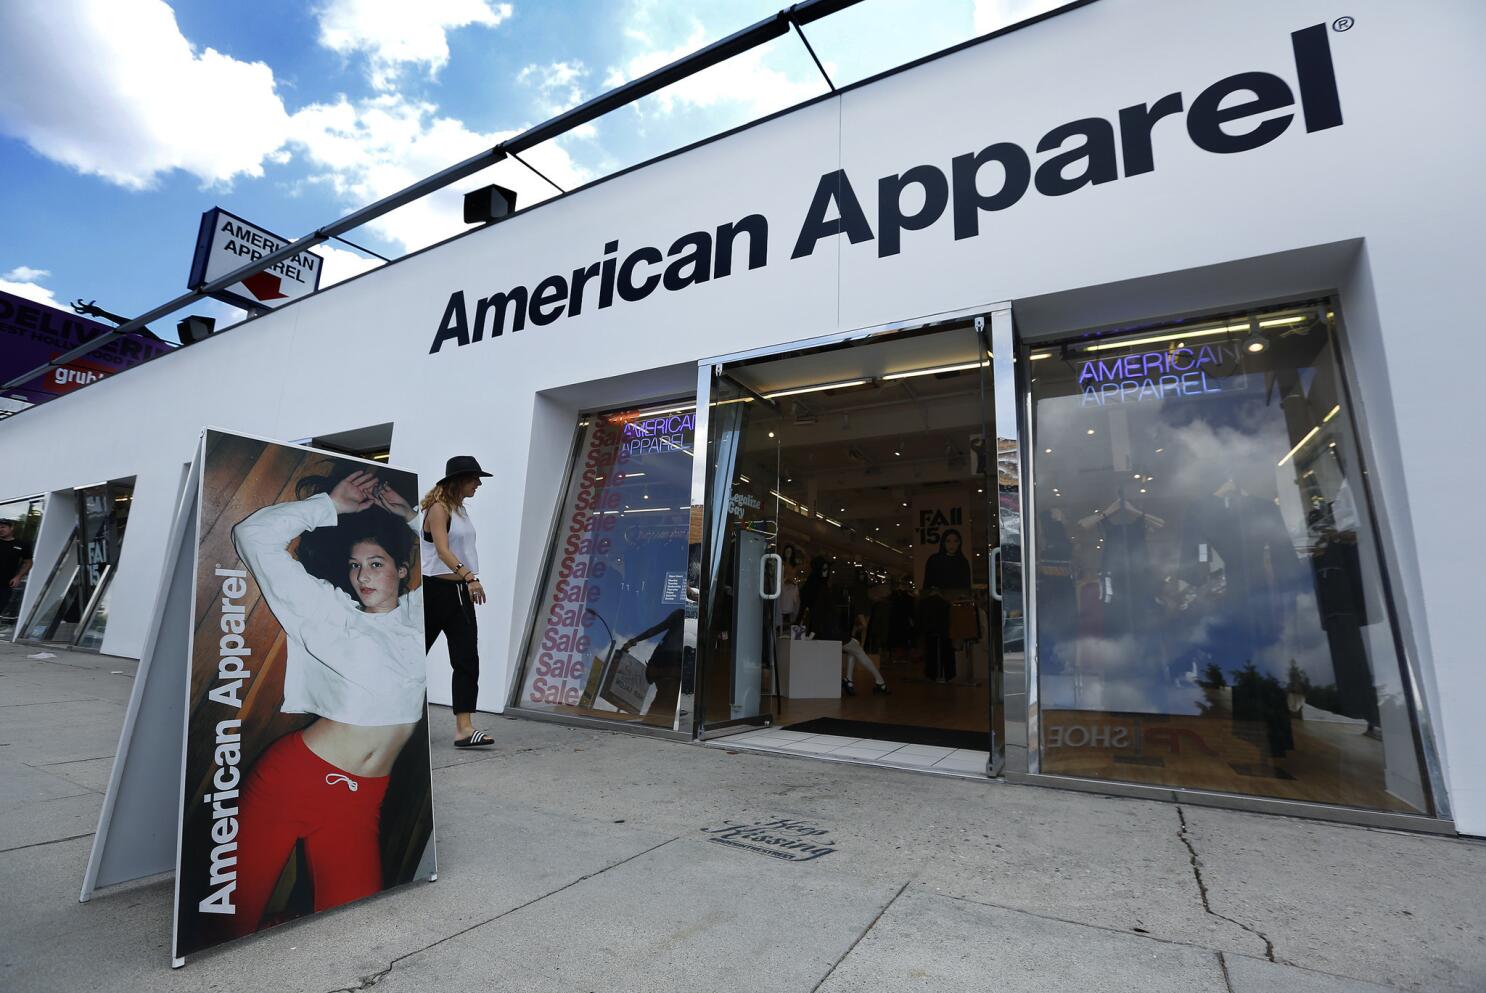 American Apparel Los Angeles Store Plans Shelved — for Now